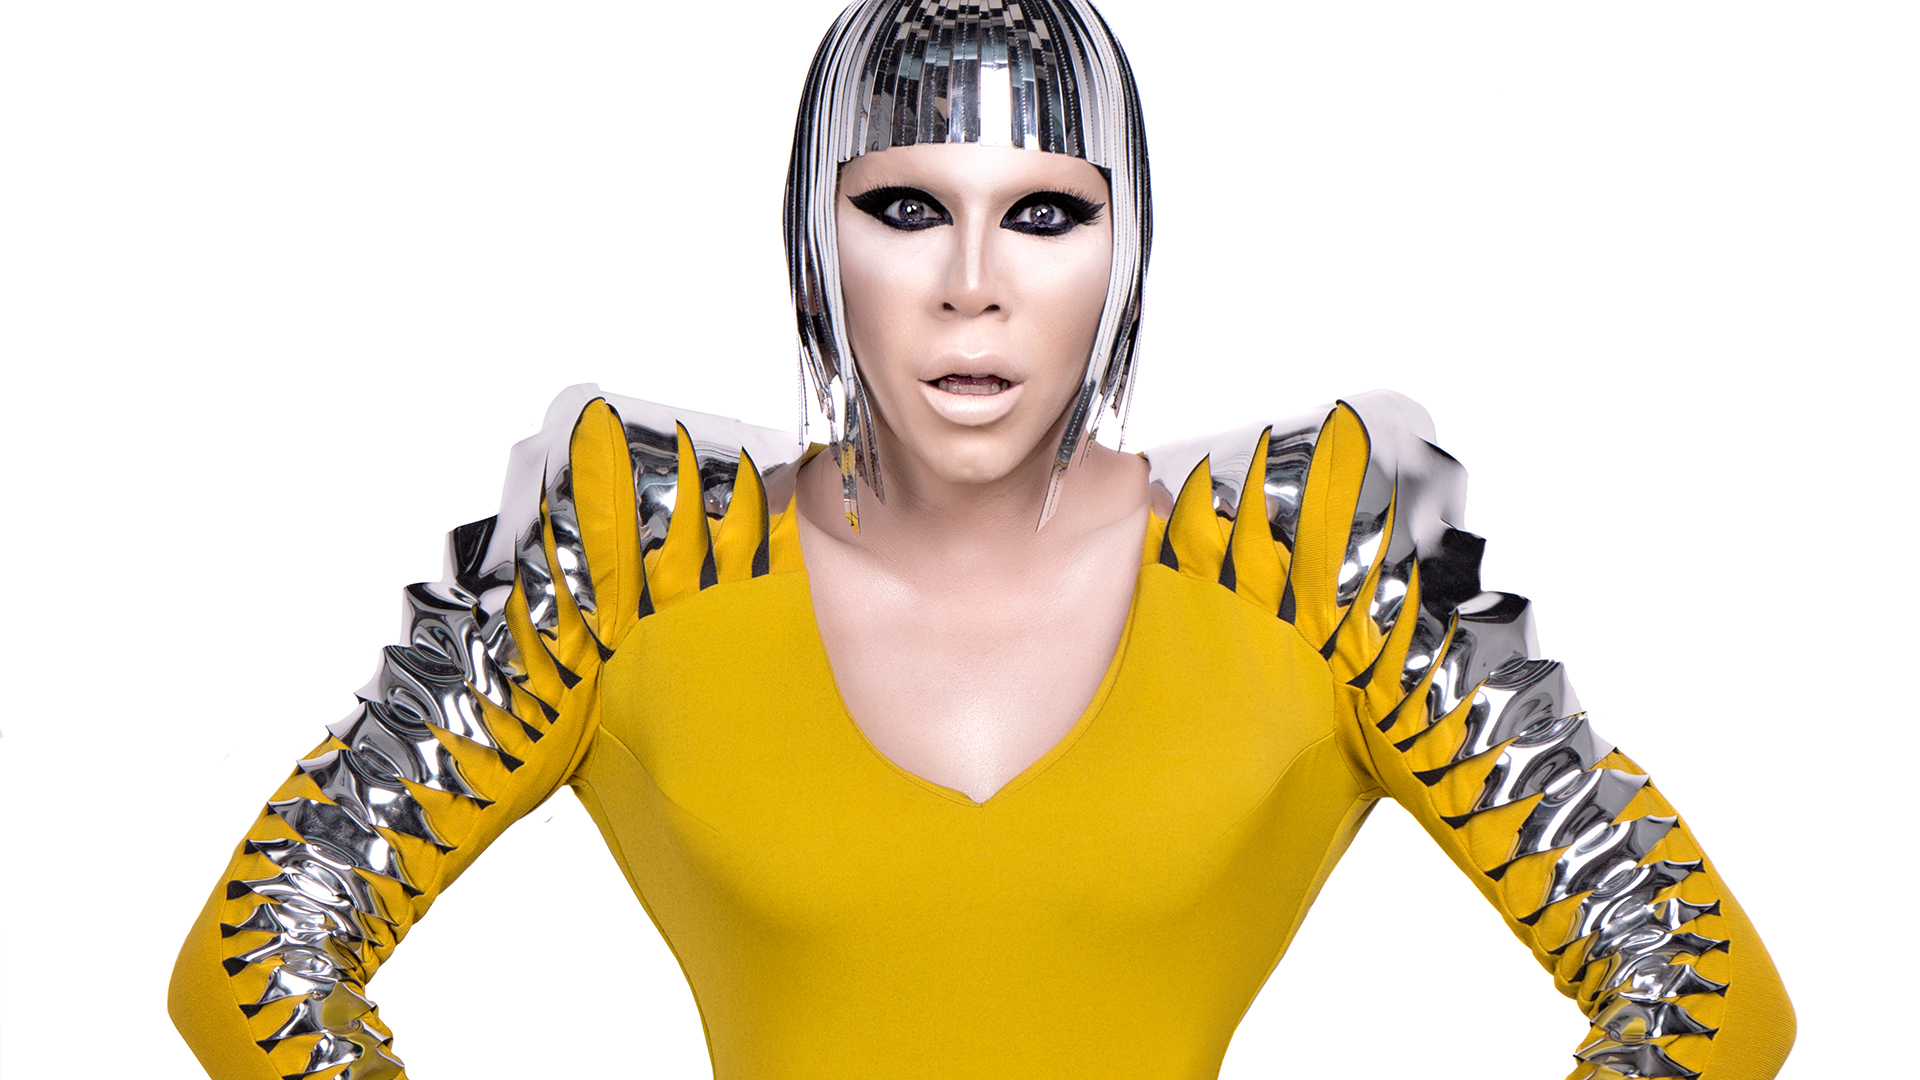 Something Wicked This Way Comes: The Sharon Needles Controversy